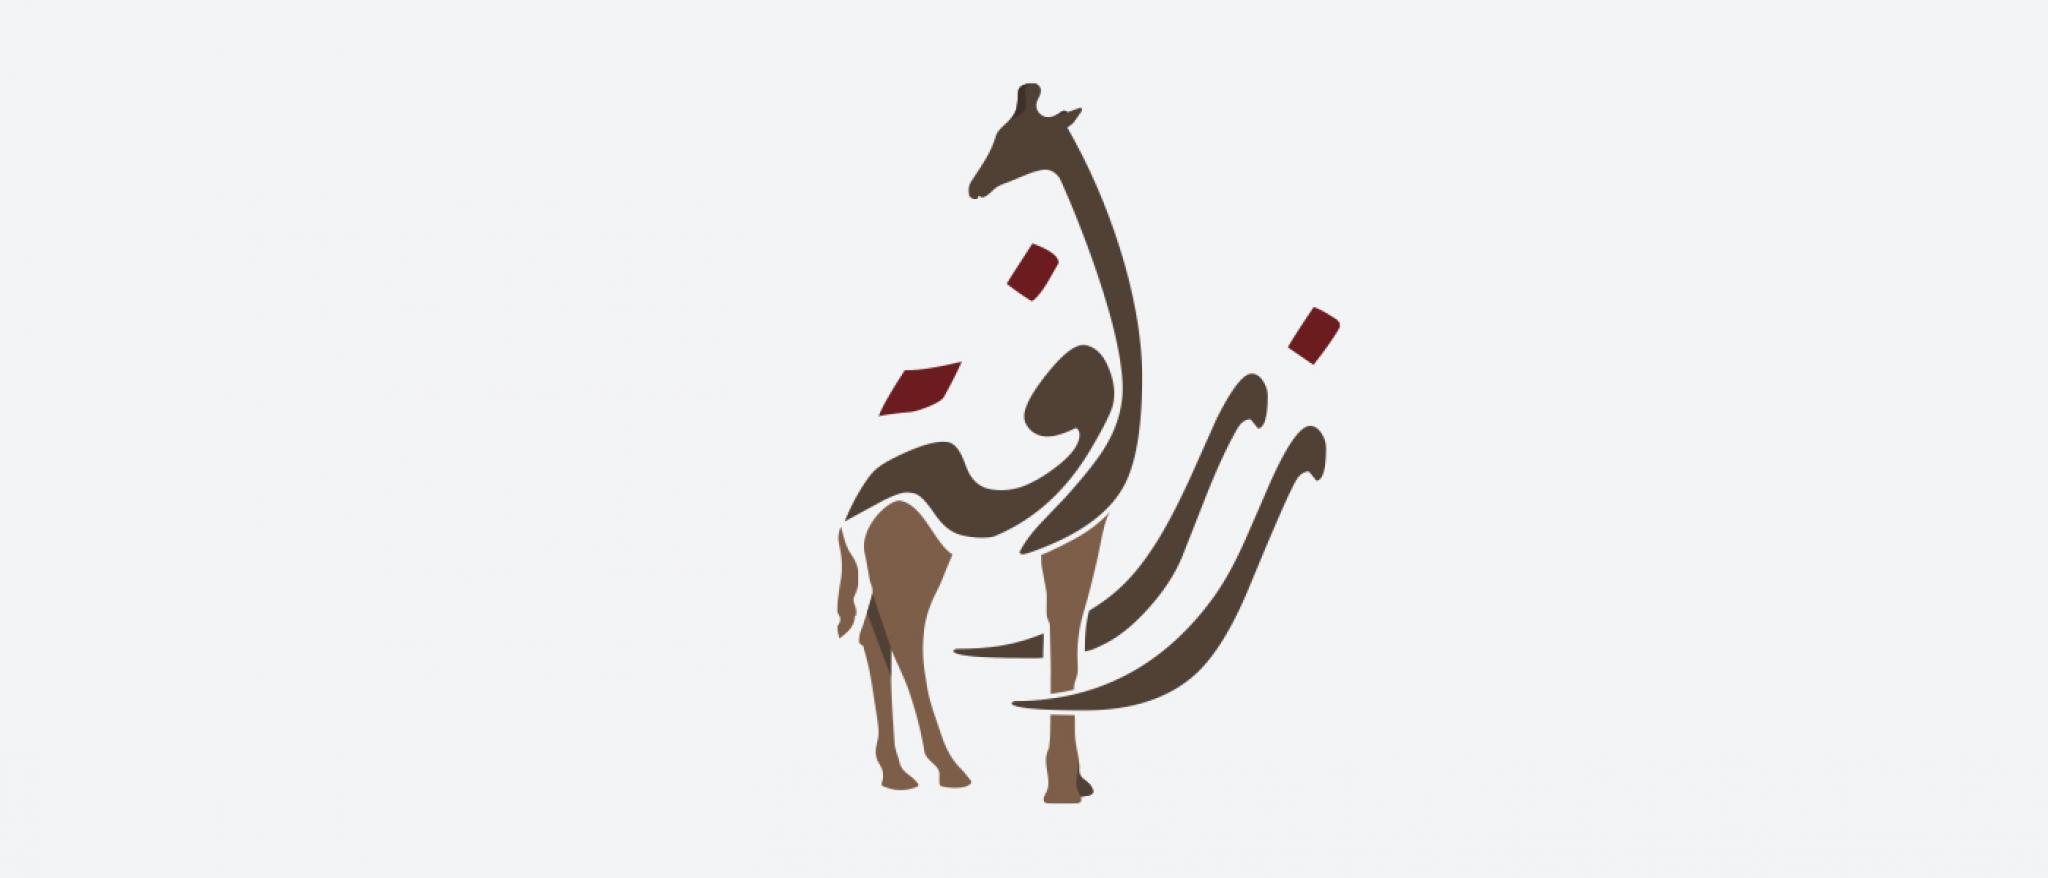 The animal in the Arabic letter